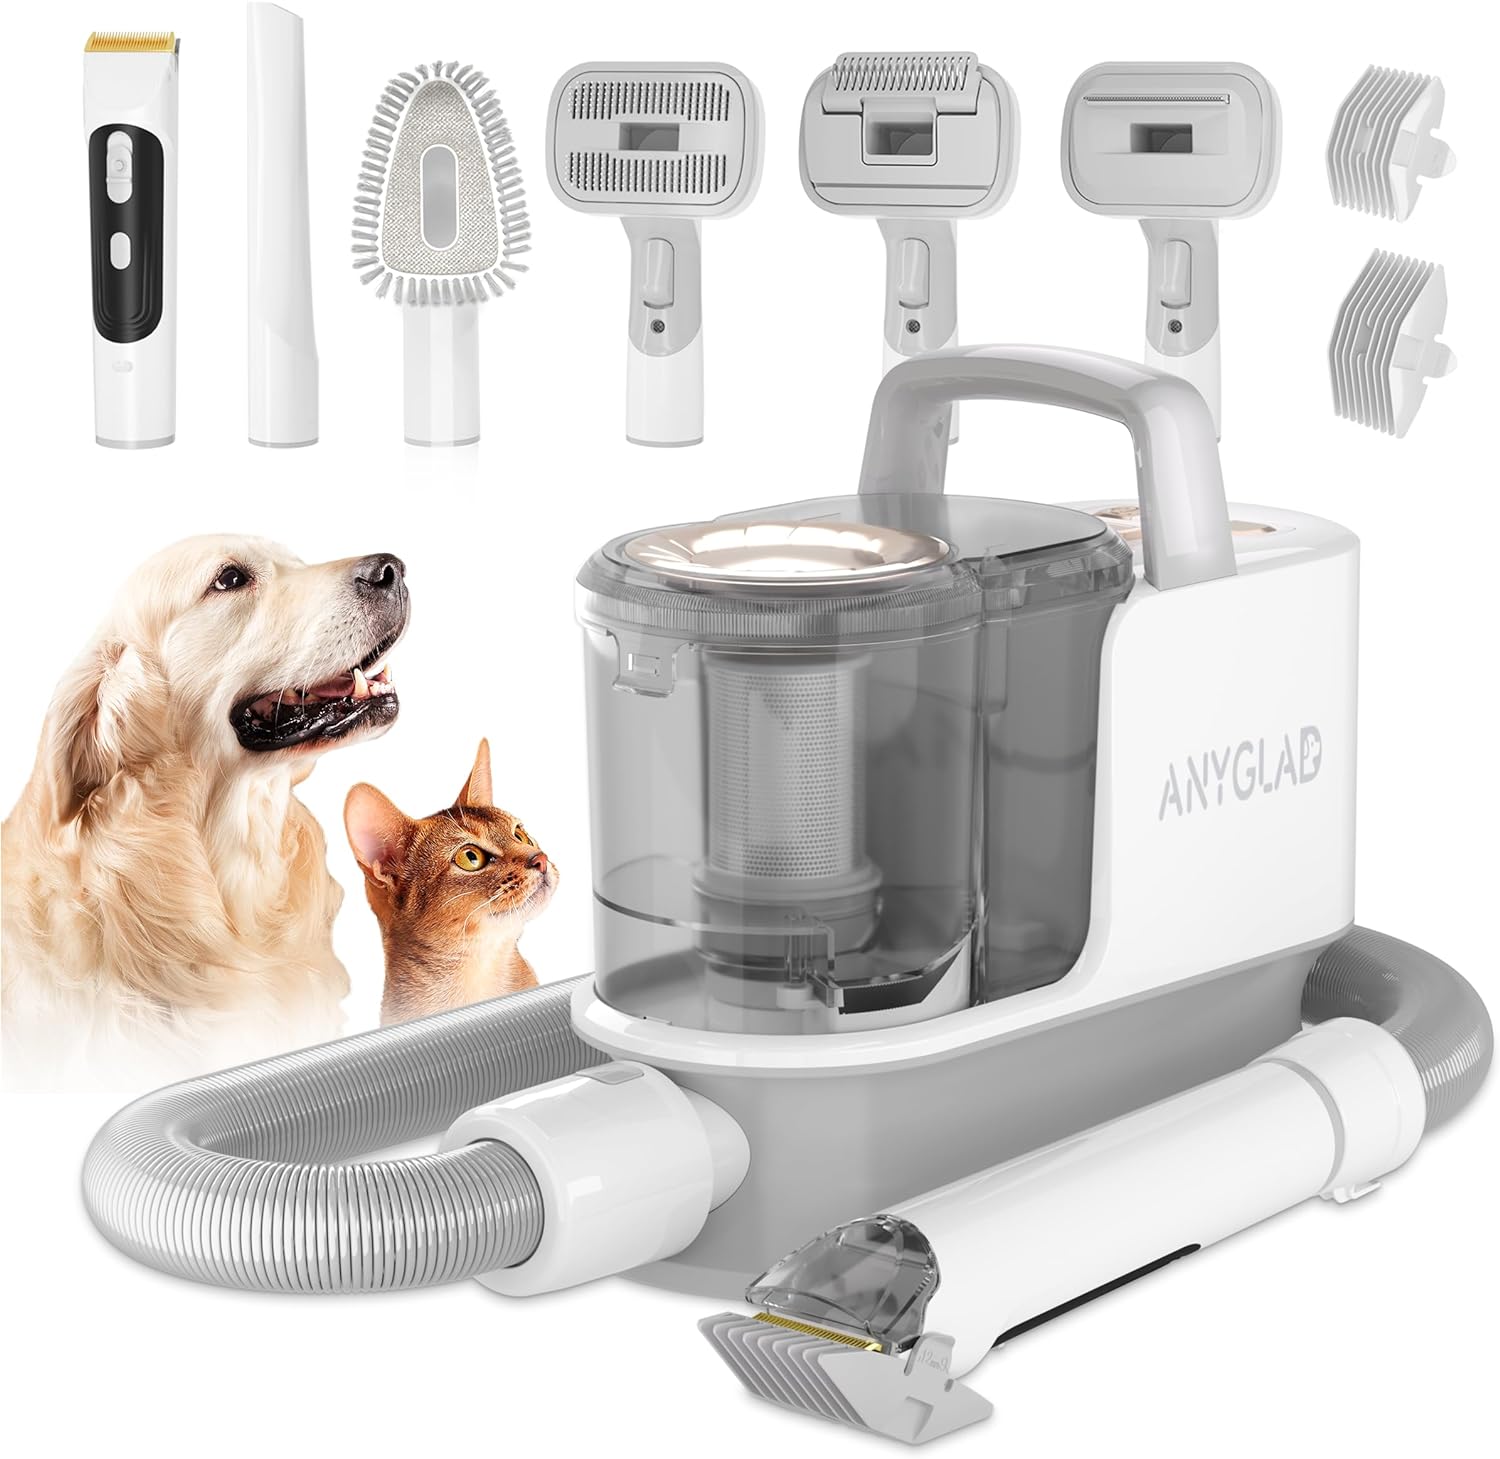 Read more about the article Anyglad Low Noise Dog Grooming Kit Review